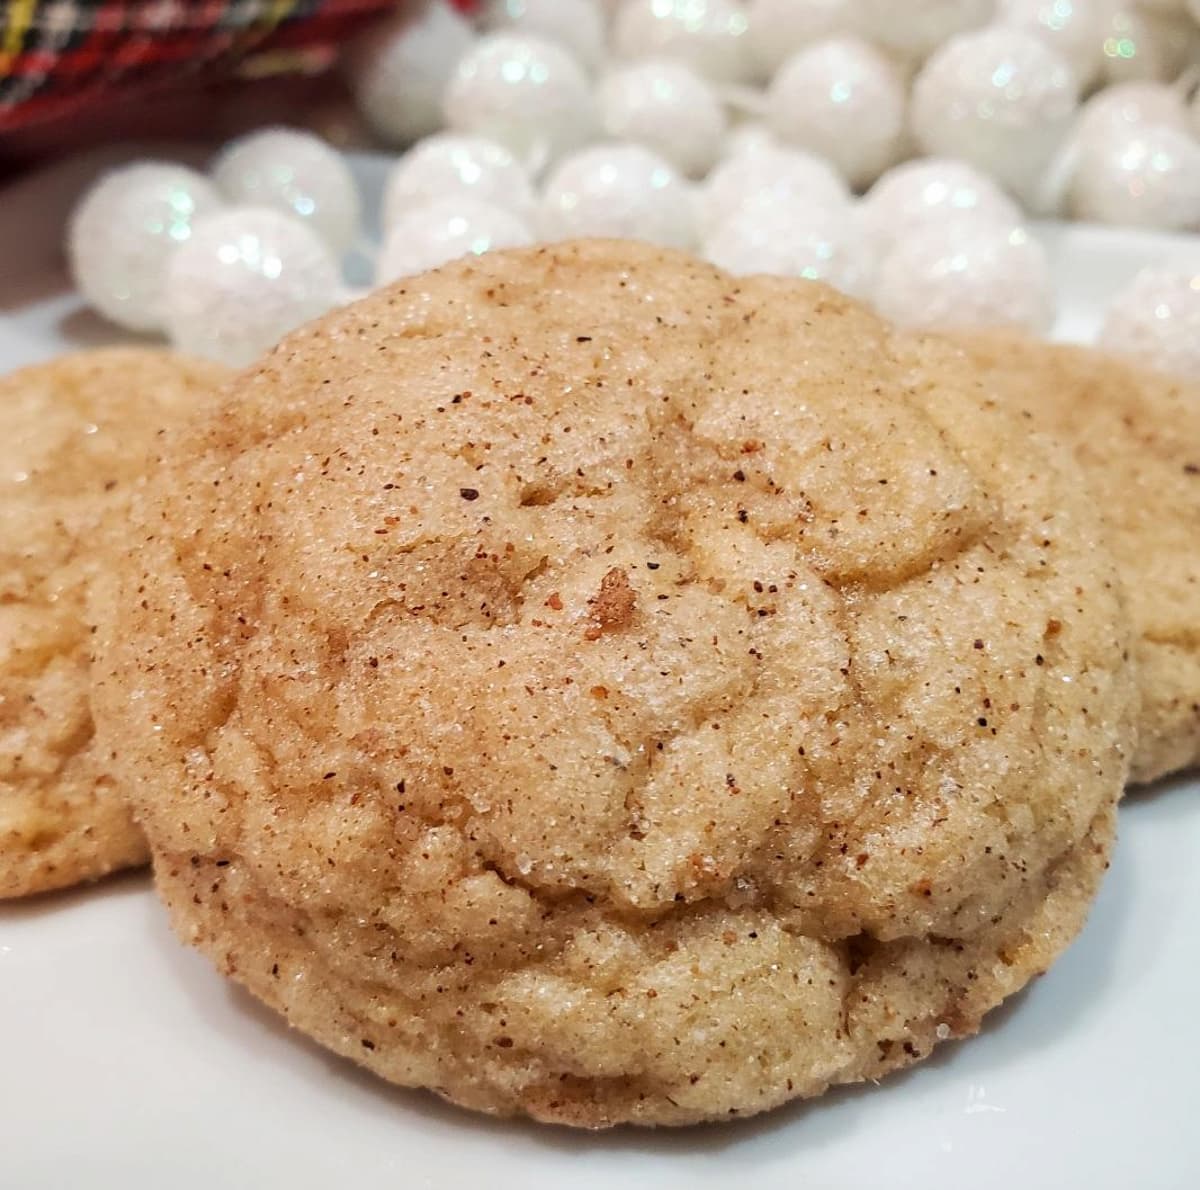 eggnog snickerdoodle cookies from cleveland cooking. Christmas decorations in the background.